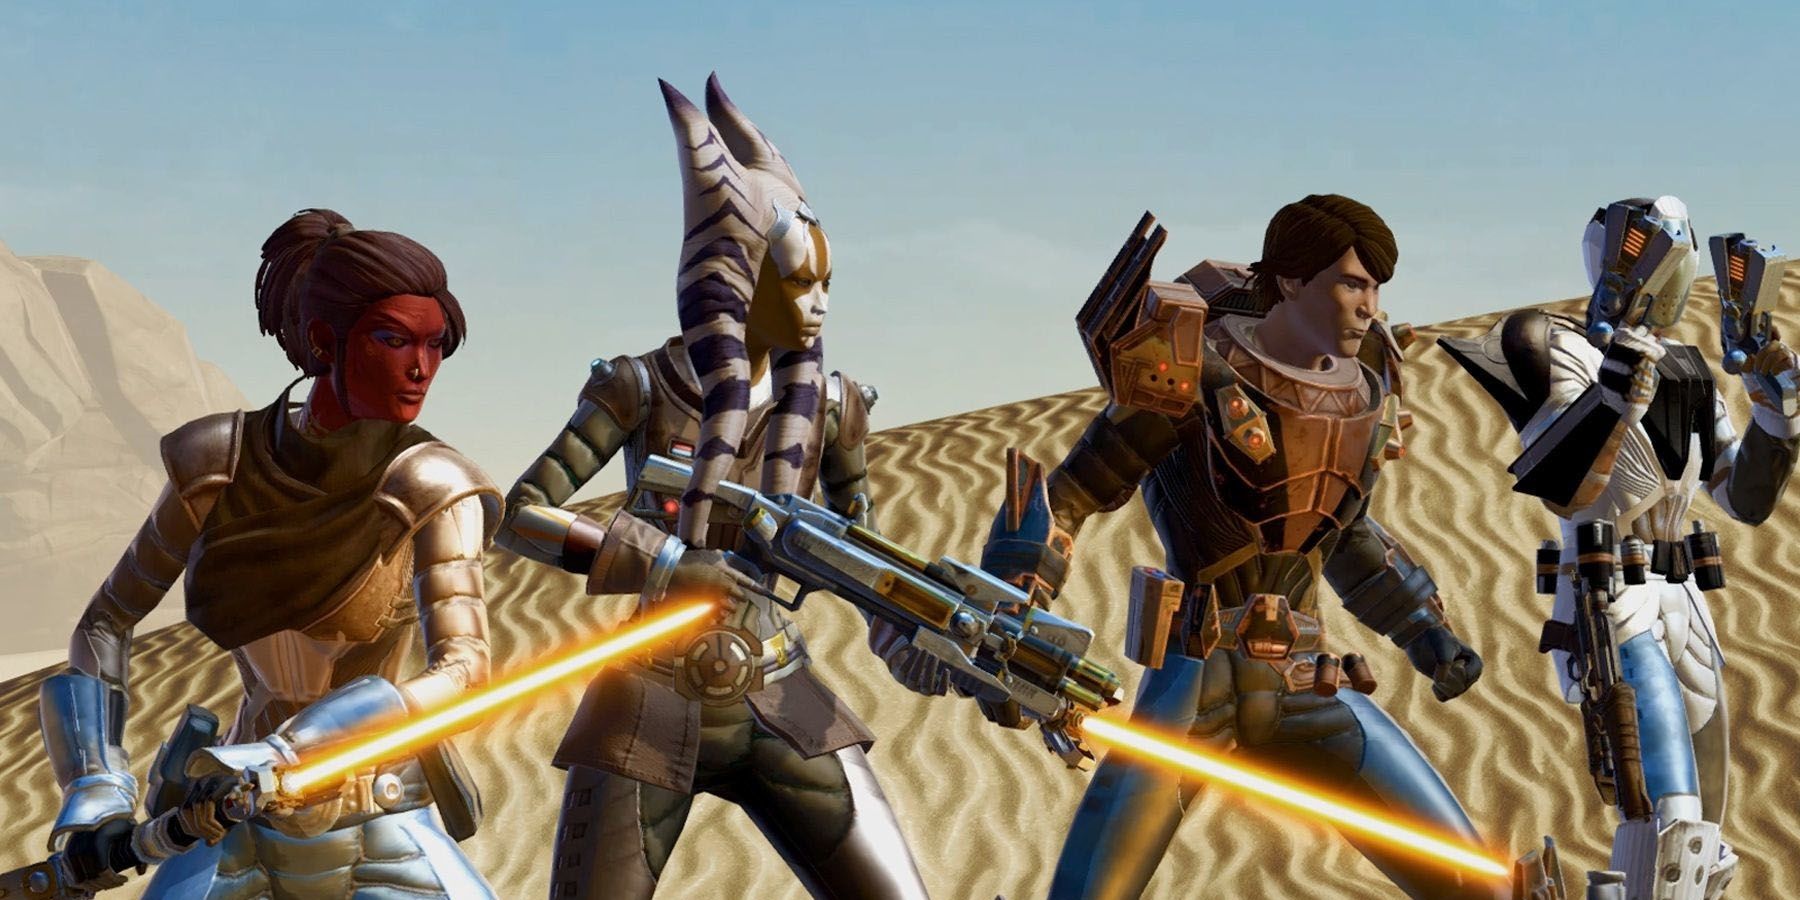 Adventurers in Star Wars The Old Republic